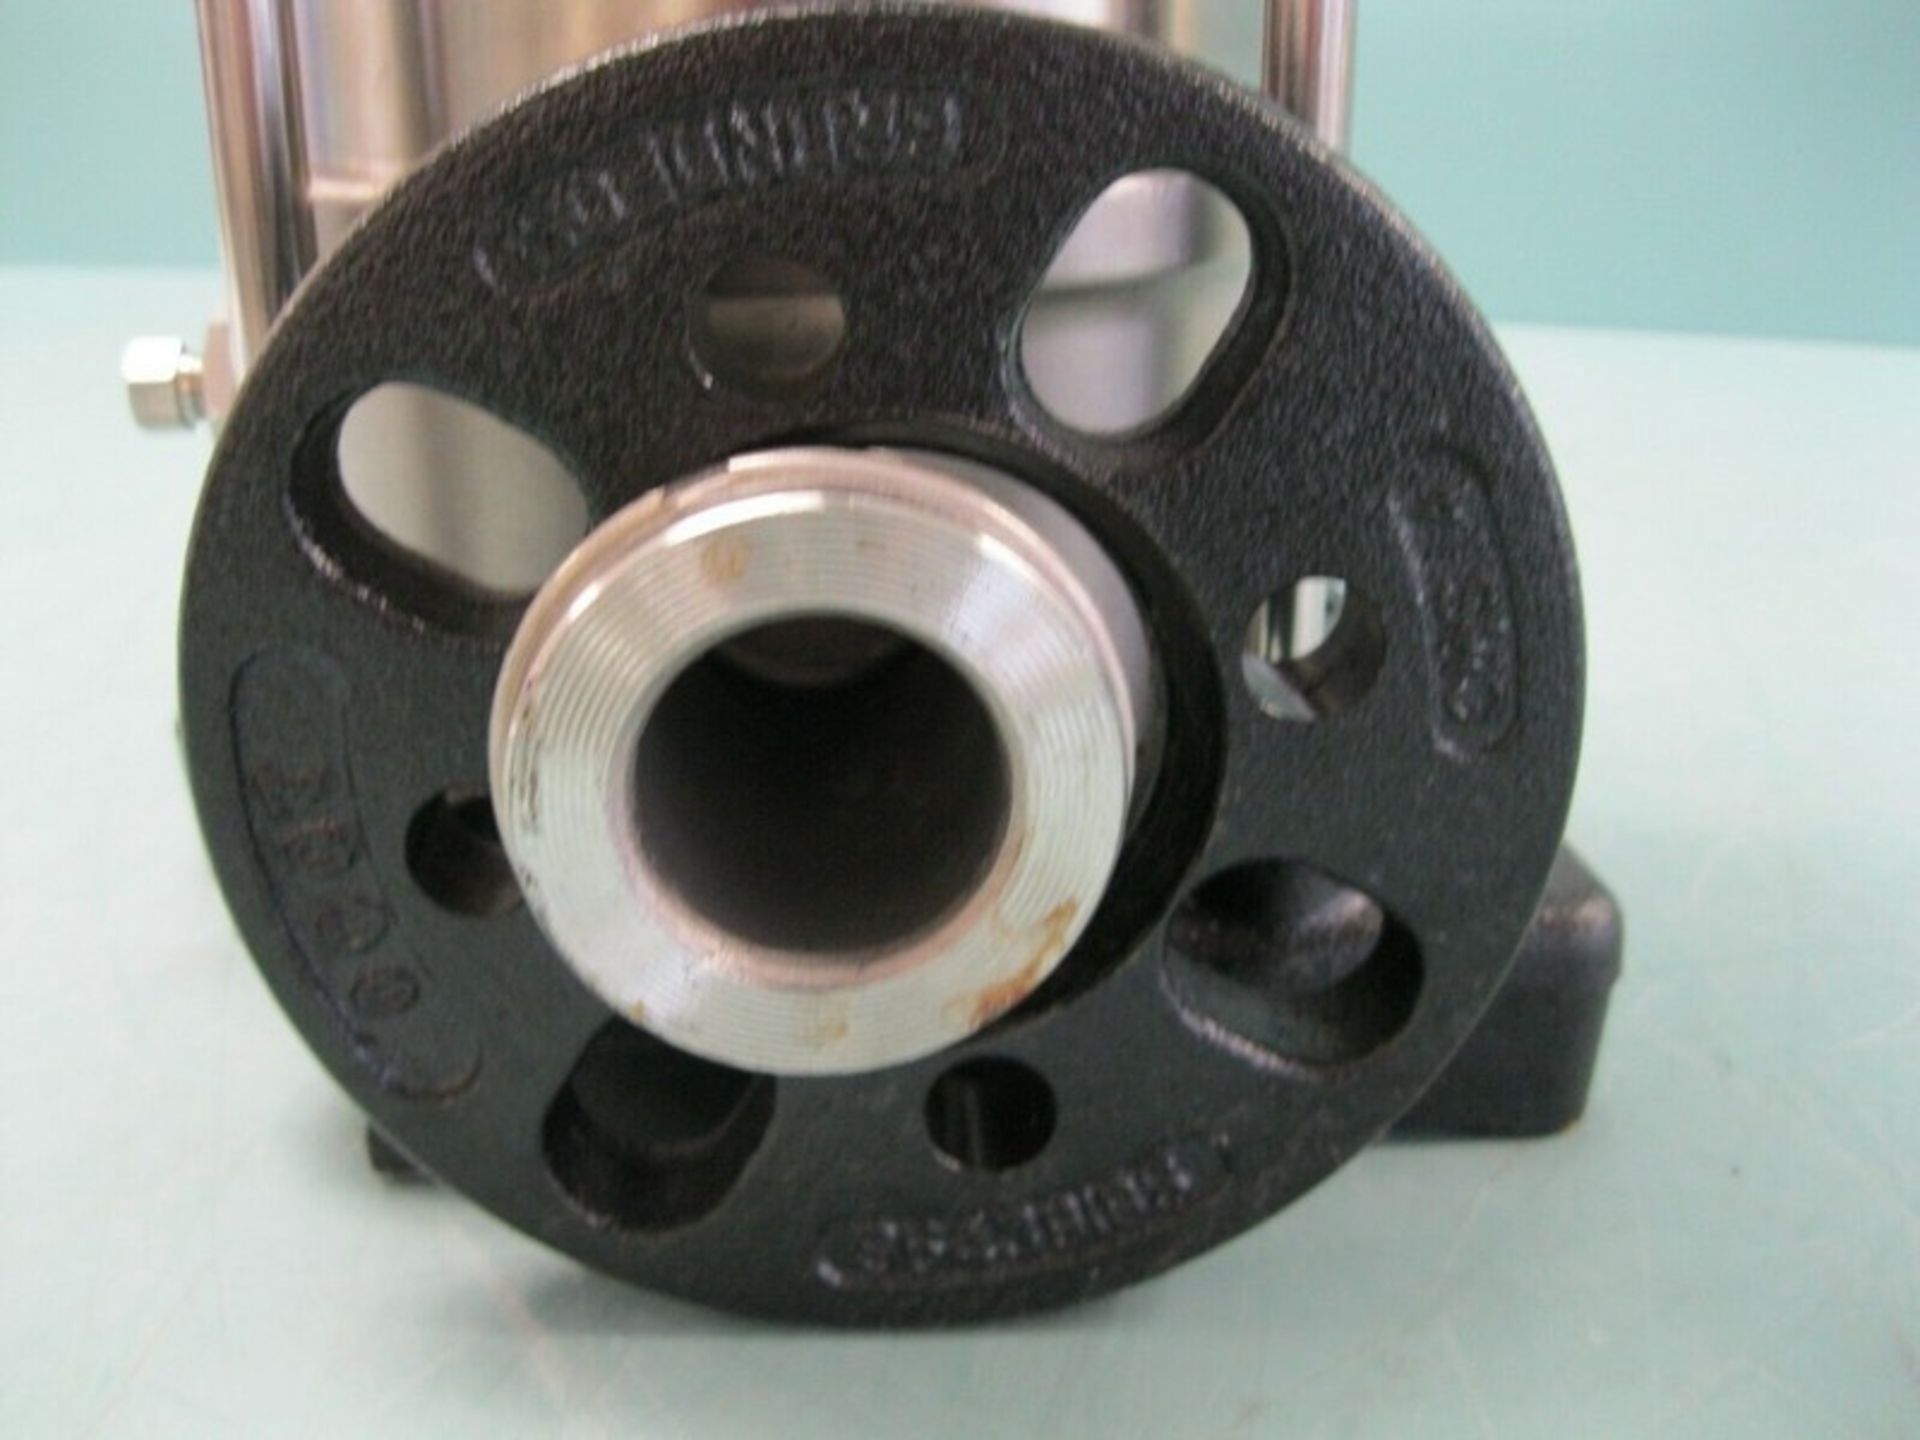 1" Grundfos CRN 1S-12 Centrifugal Pump DIN/ANSI/JIS 3/4 HP Motor AS IS (NOTE: Packing and - Image 2 of 7